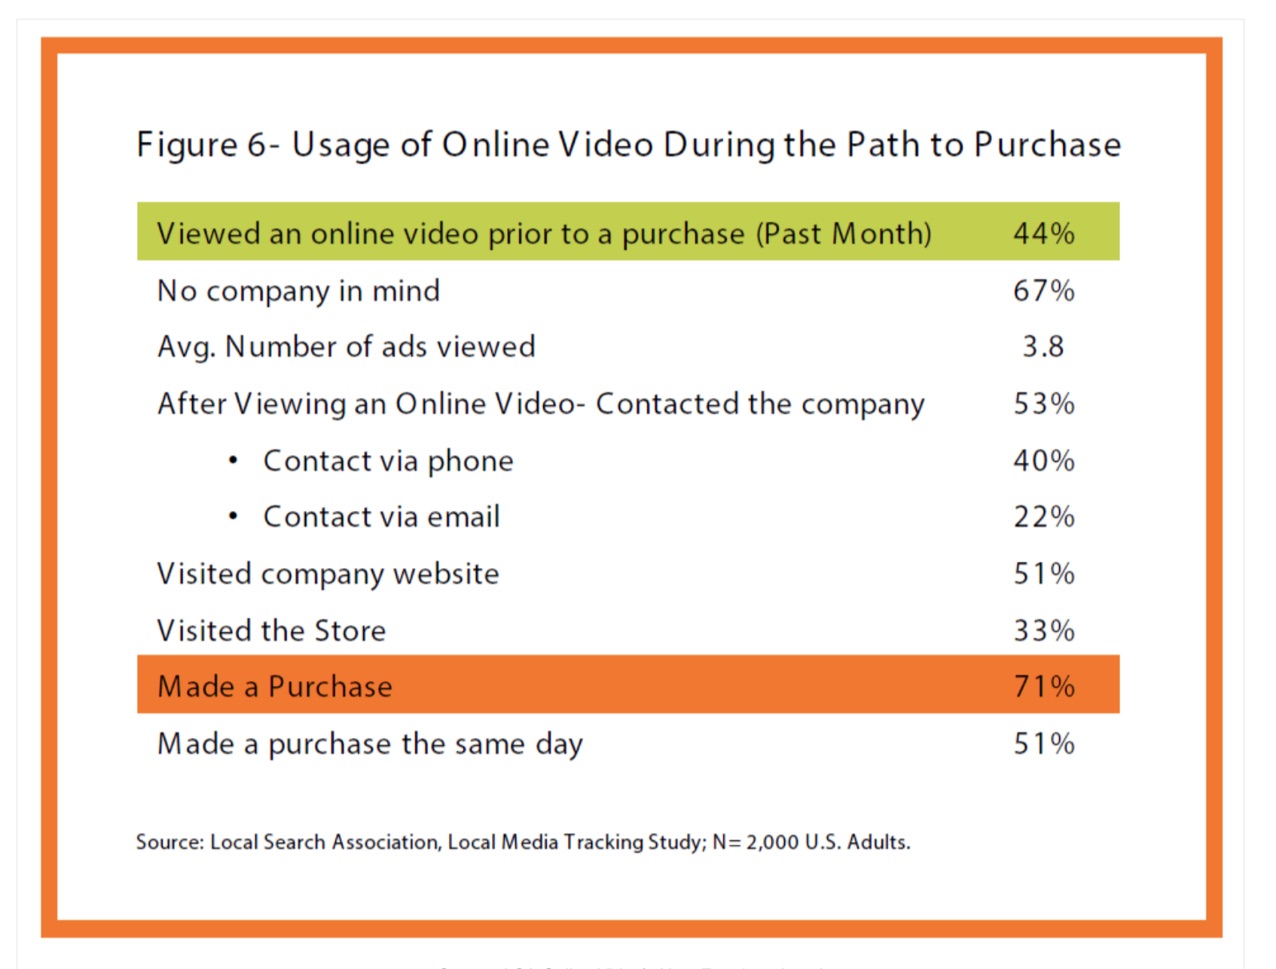 usage of online video during path to purchase